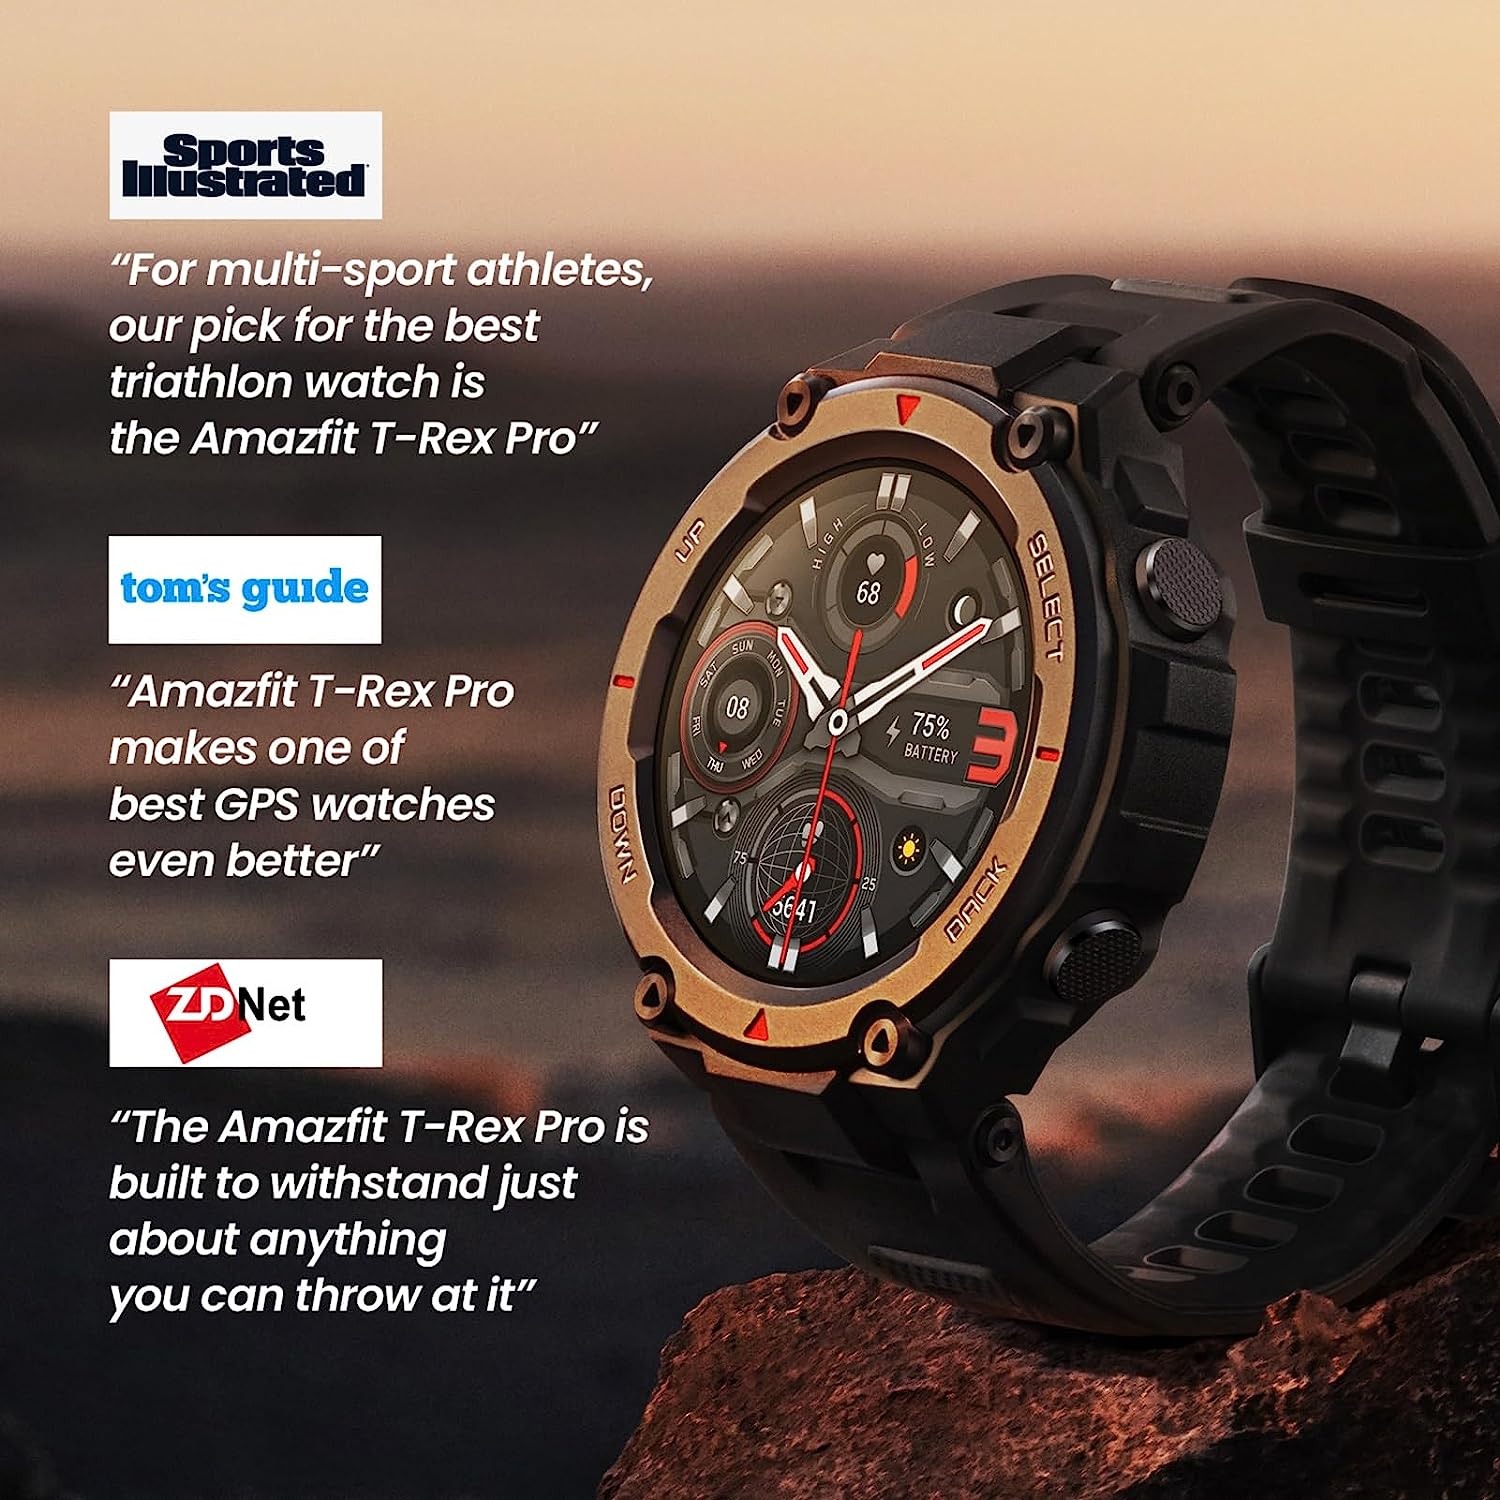 Amazfit T-Rex Pro Smart Watch With GPS, Outdoor Fitness Watch for Men, Military Standard Certified, 100+ Sports Modes, 10 ATM Waterproof, 18 Day Battery Life, Blood Oxygen Heart Rate Monitor, Black